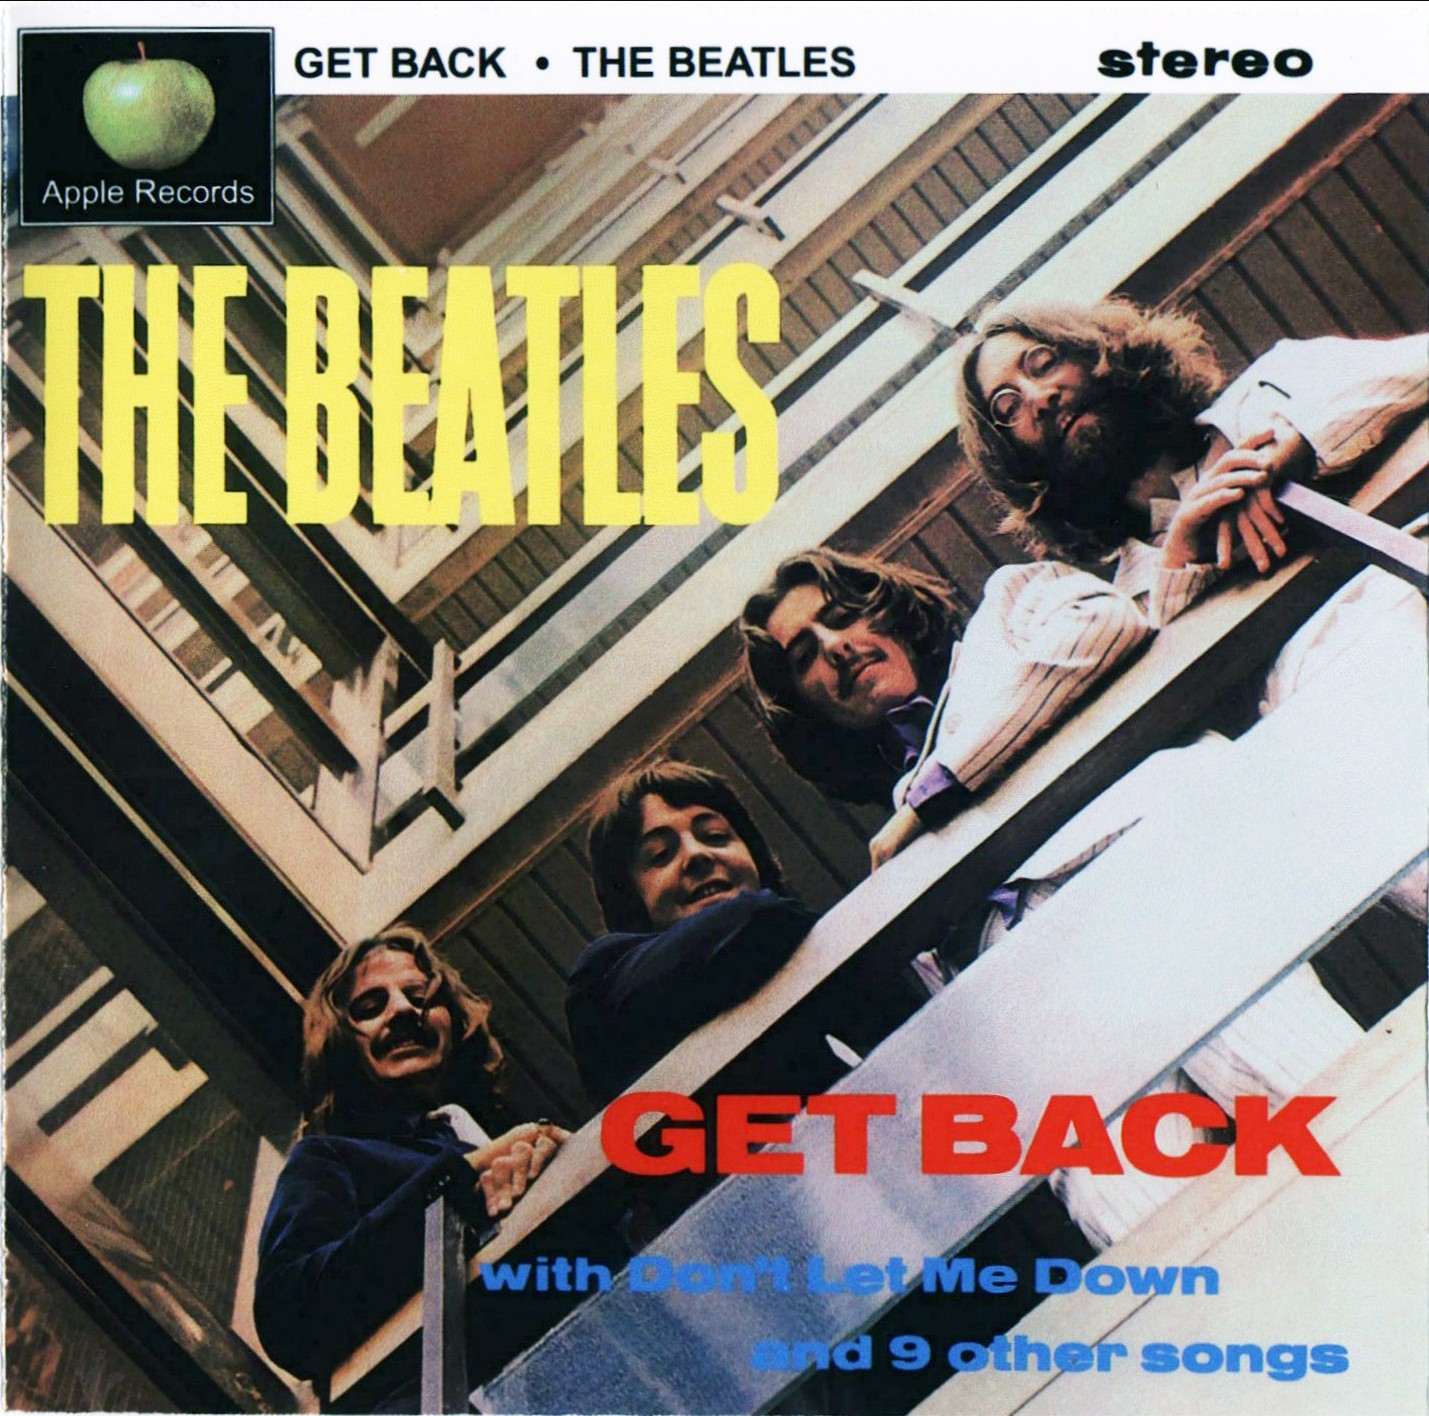 The Beatles – The “Get Back” Box Set – The Squire Presents